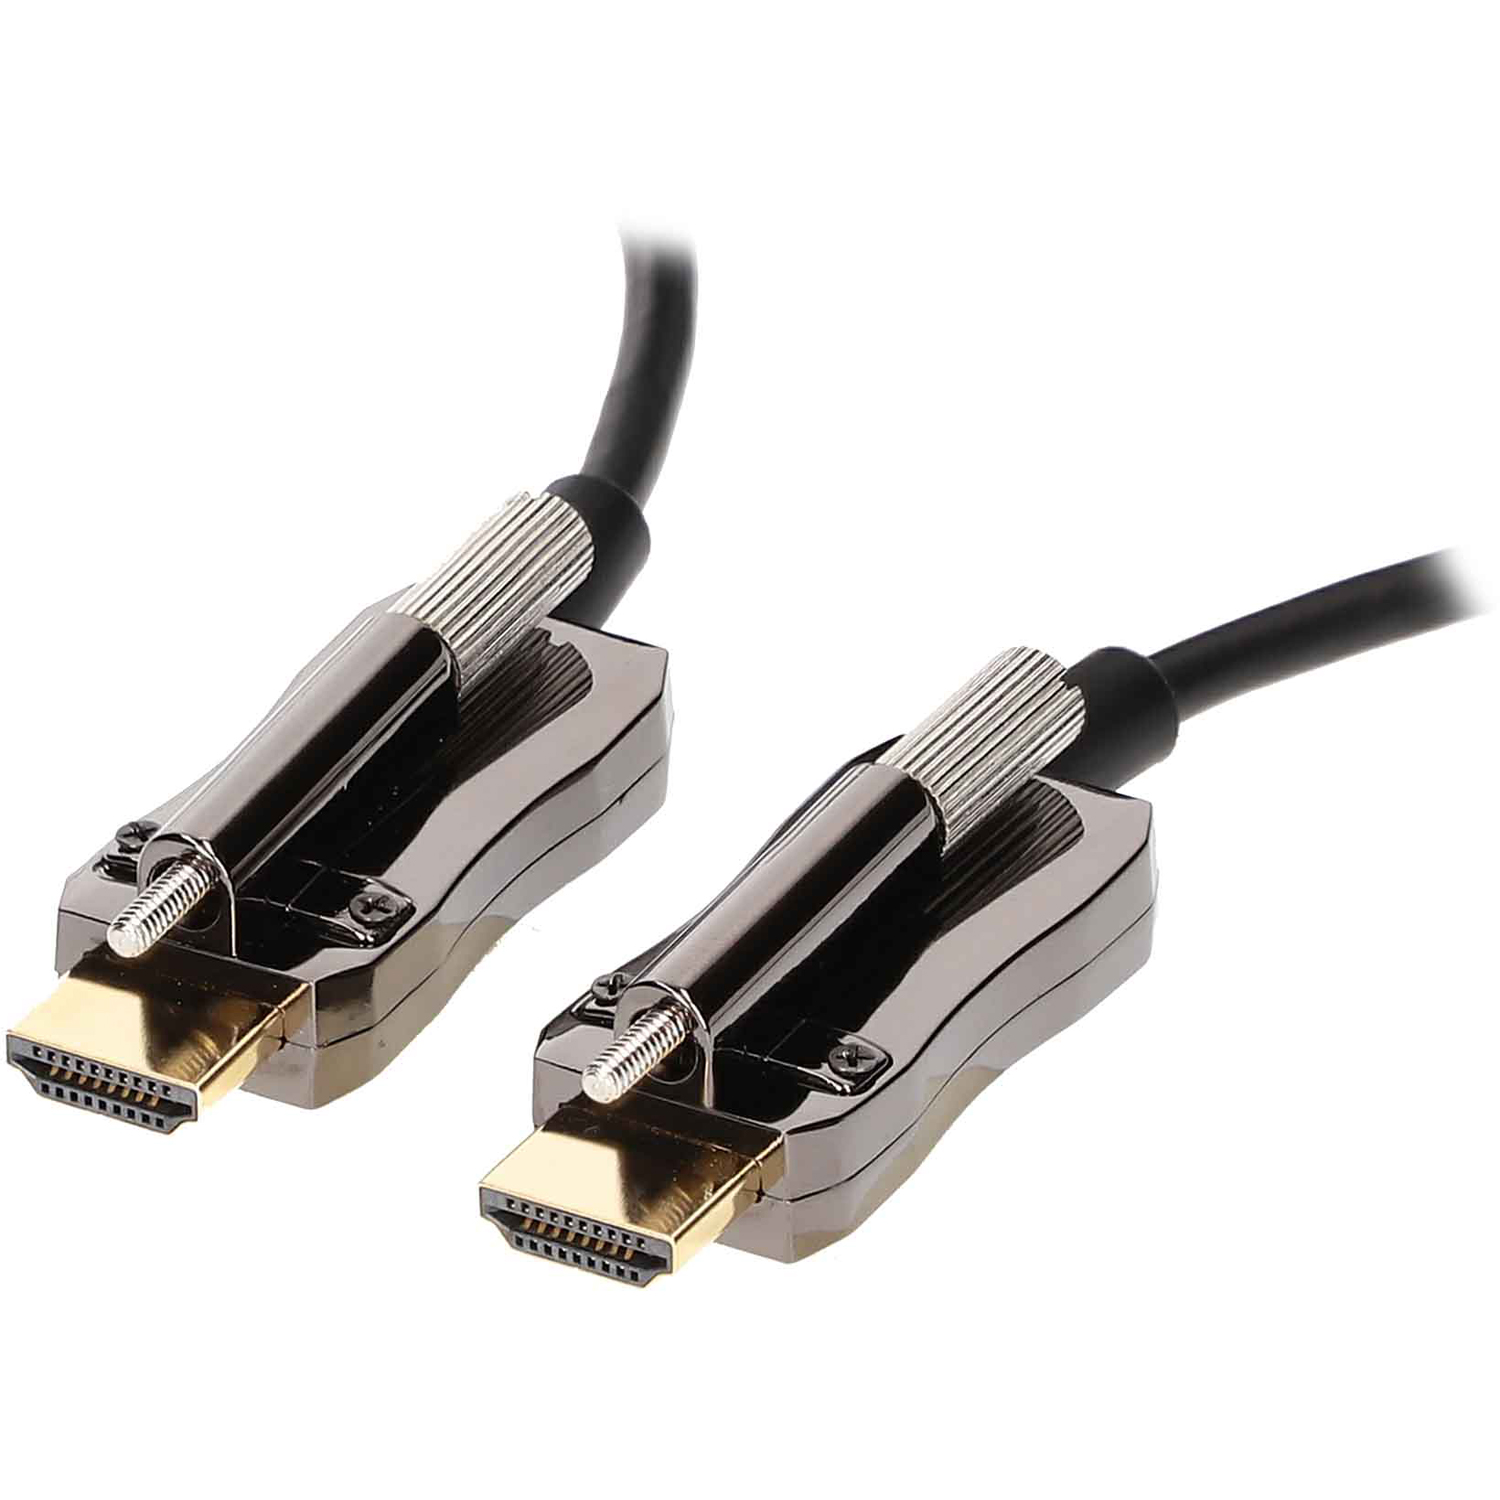 ETHEREAL EHV-HDG2 33ft 8K Fiber Ultimate High Speed HDMI Cable